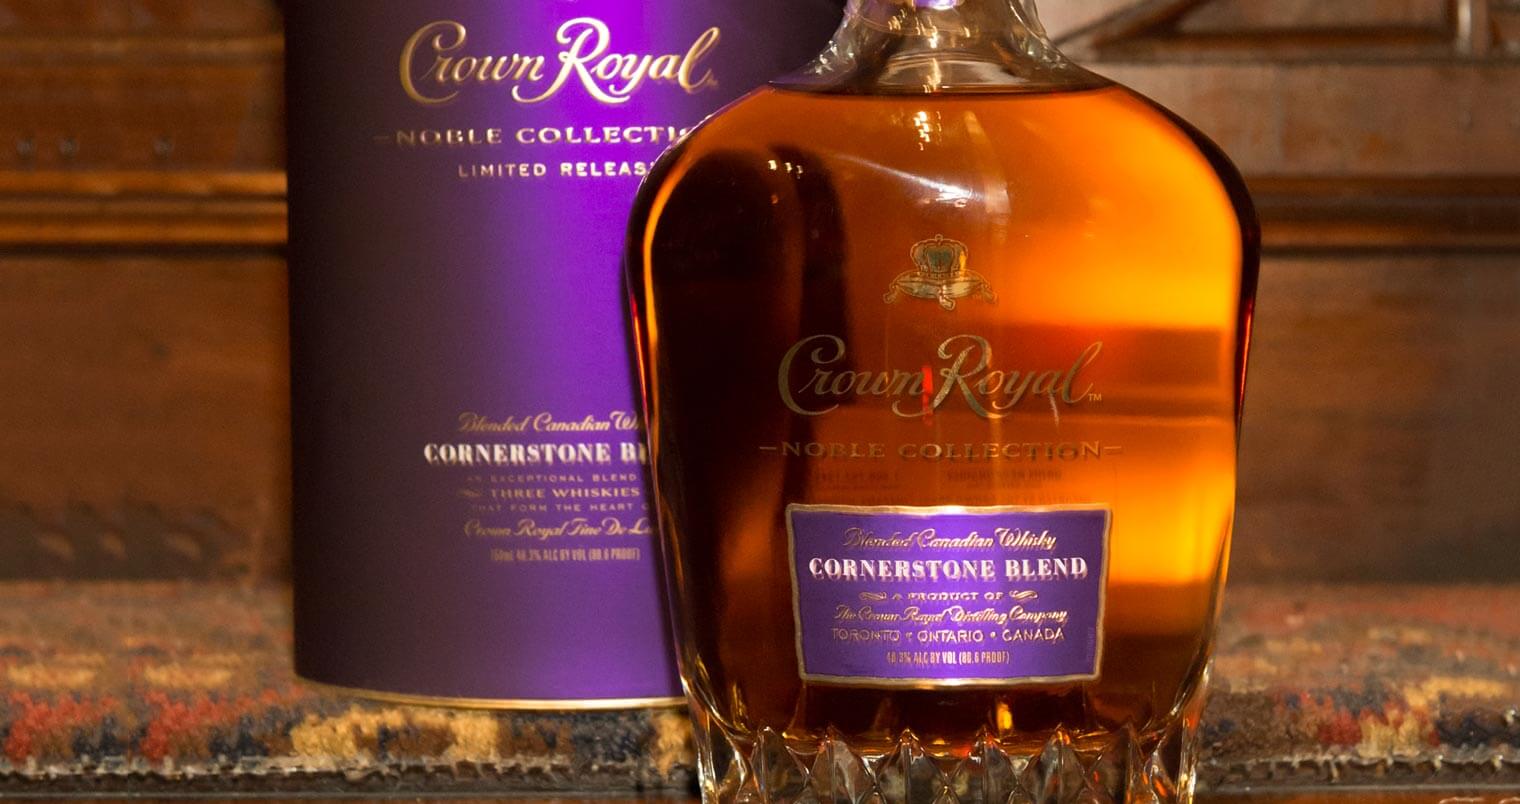 Crown Royal Cornerstone Blend Tasting Goes Down in NYC, industry news, featured image